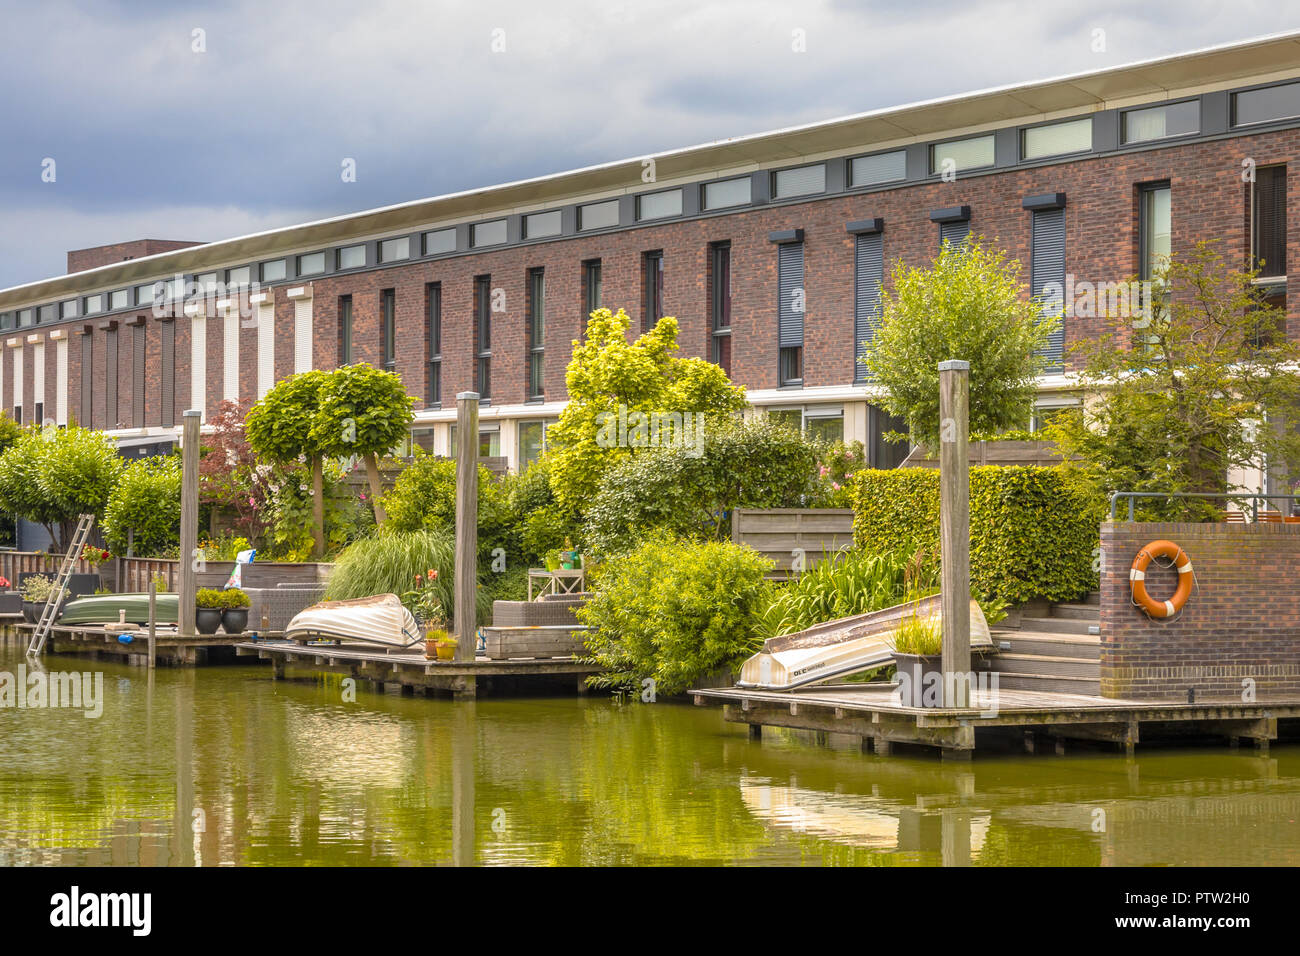 Modern row houses with  hanging terrace gardens on waterfront in urban area of The Hague, Netherlands Stock Photo